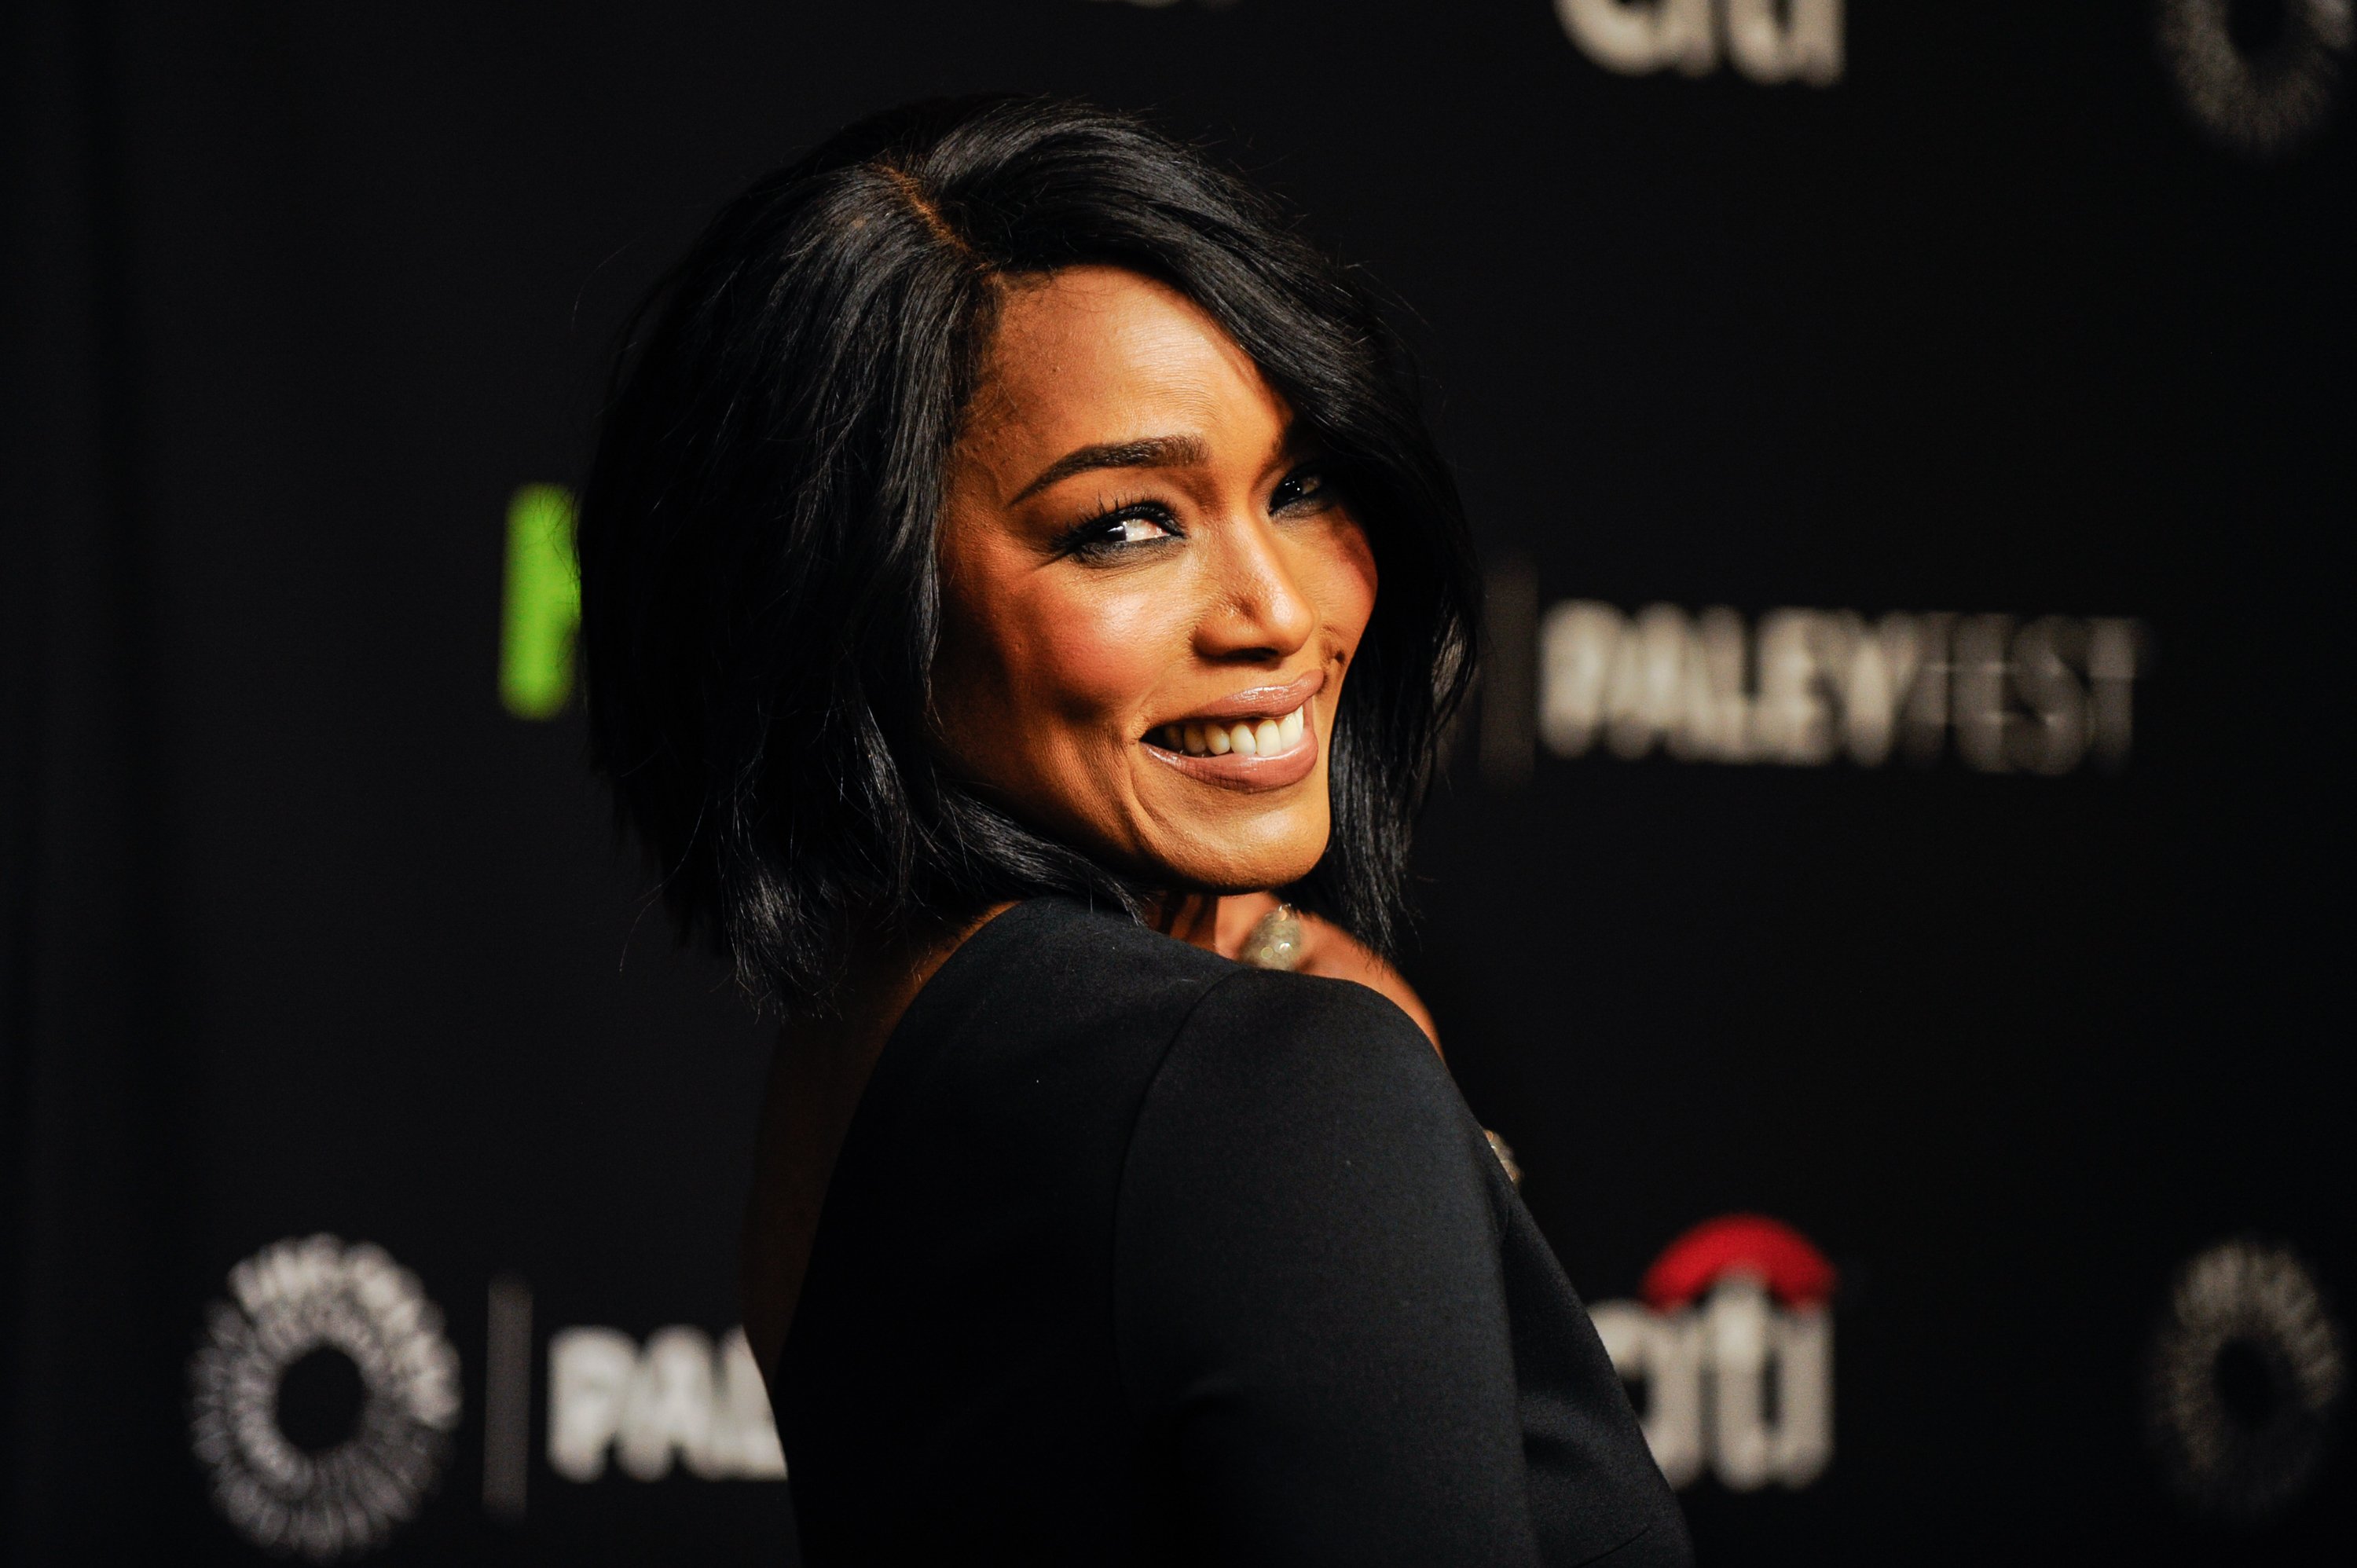 Actress Angela Bassett attends The Paley Center For Media's 33rd Annual PaleyFest on March 20, 2016 | Photo: Getty Images